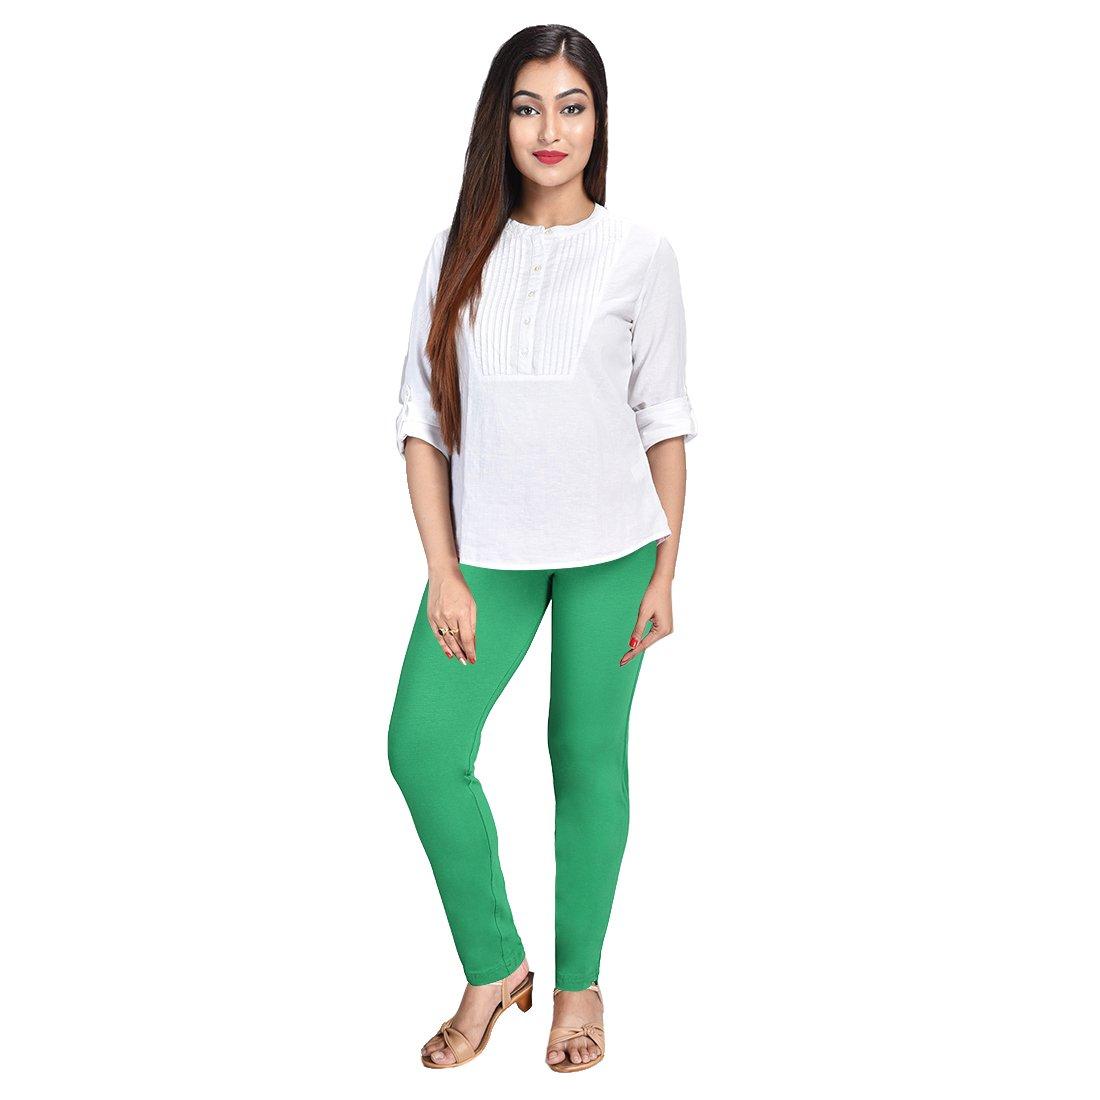 Comfort Lady Regular Fit Women Gold Trousers - Buy Comfort Lady Regular Fit  Women Gold Trousers Online at Best Prices in India | Flipkart.com